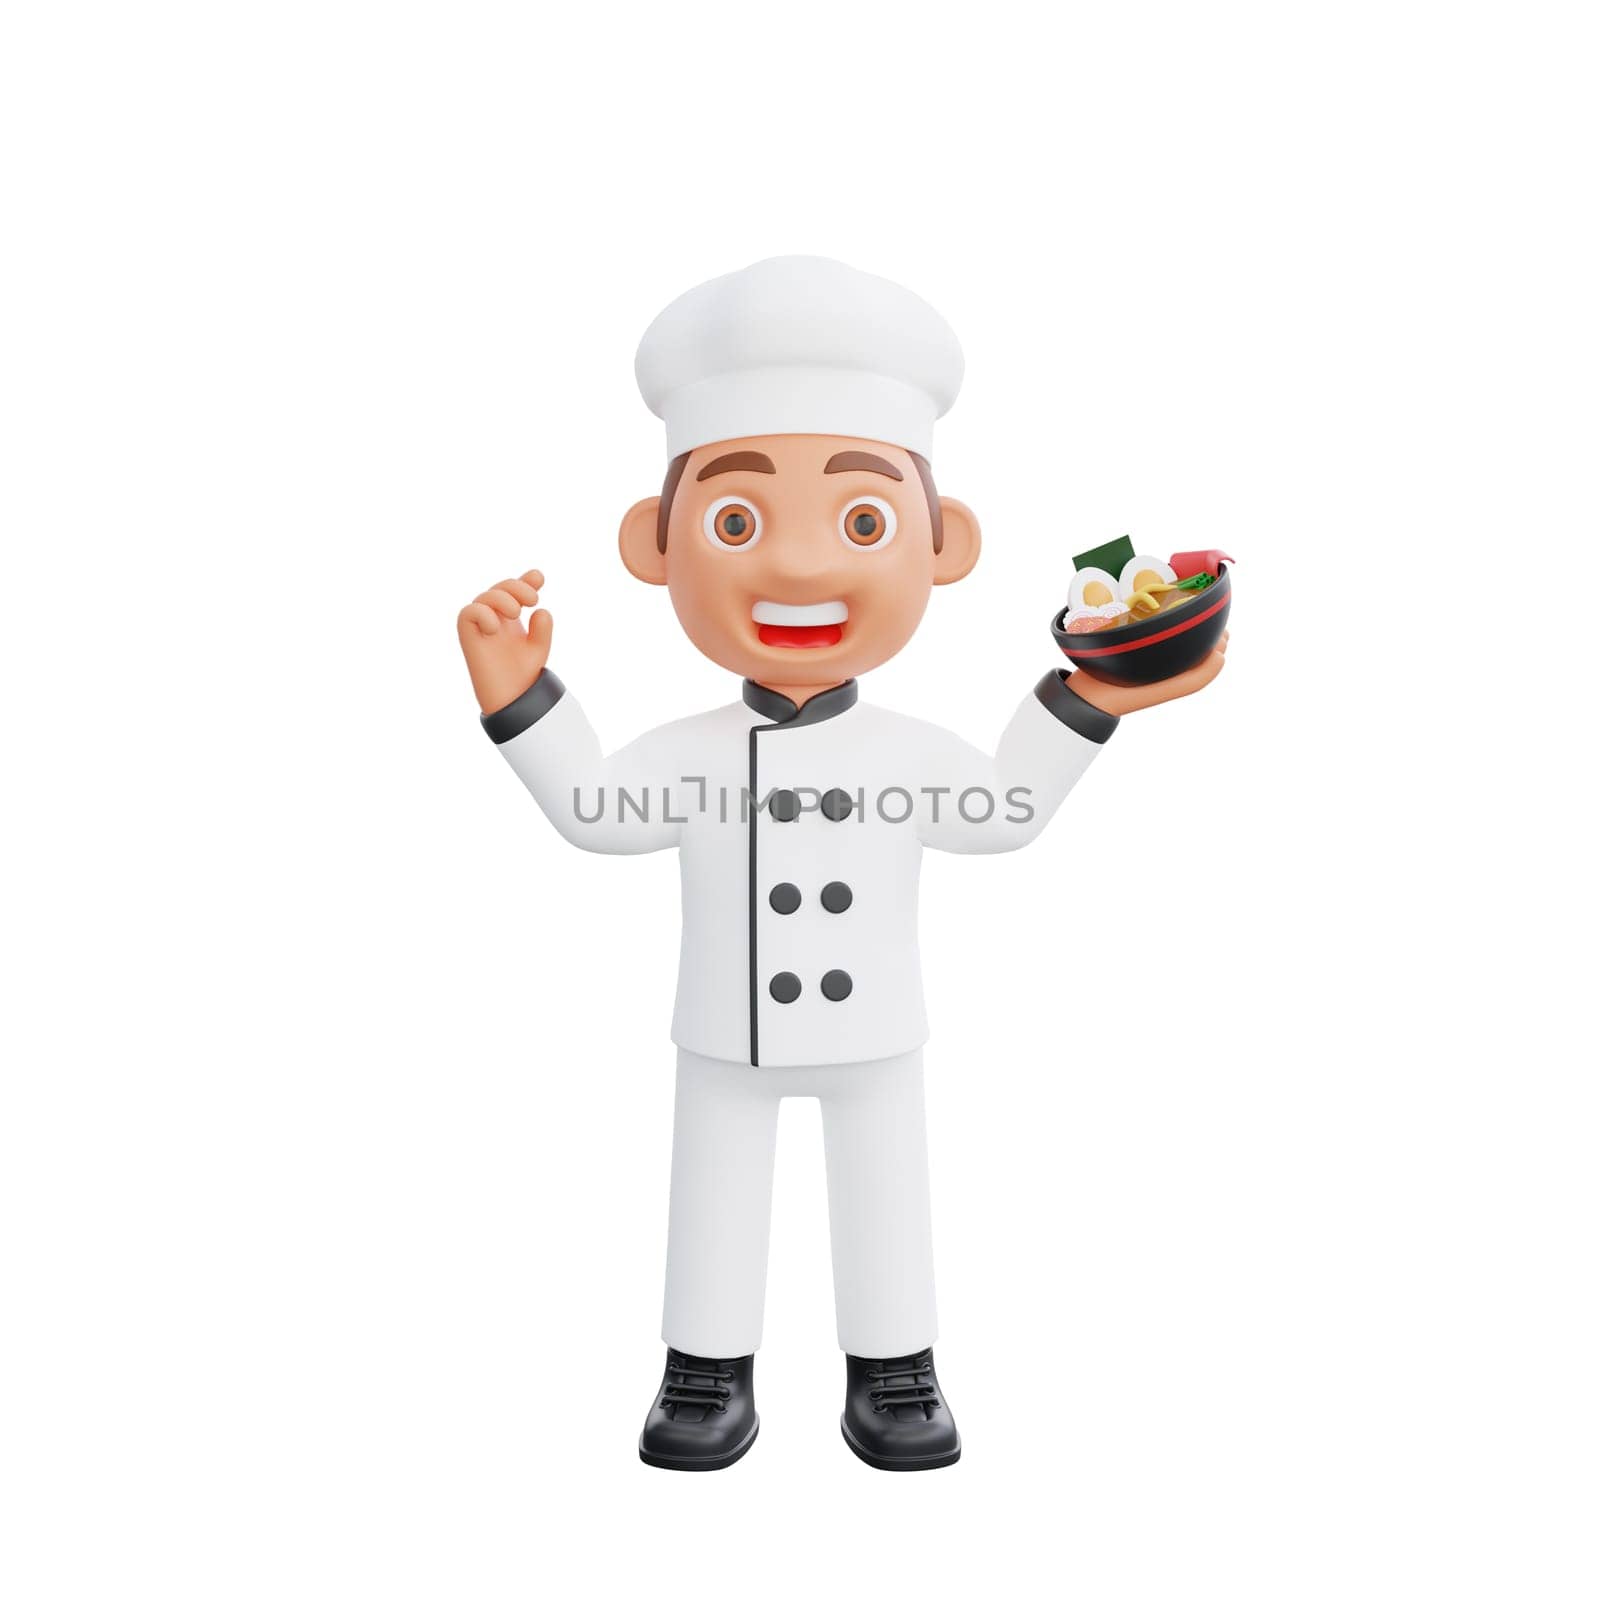 3d illustration of a chef cartoon character design. The chef is performing various activities in the kitchen